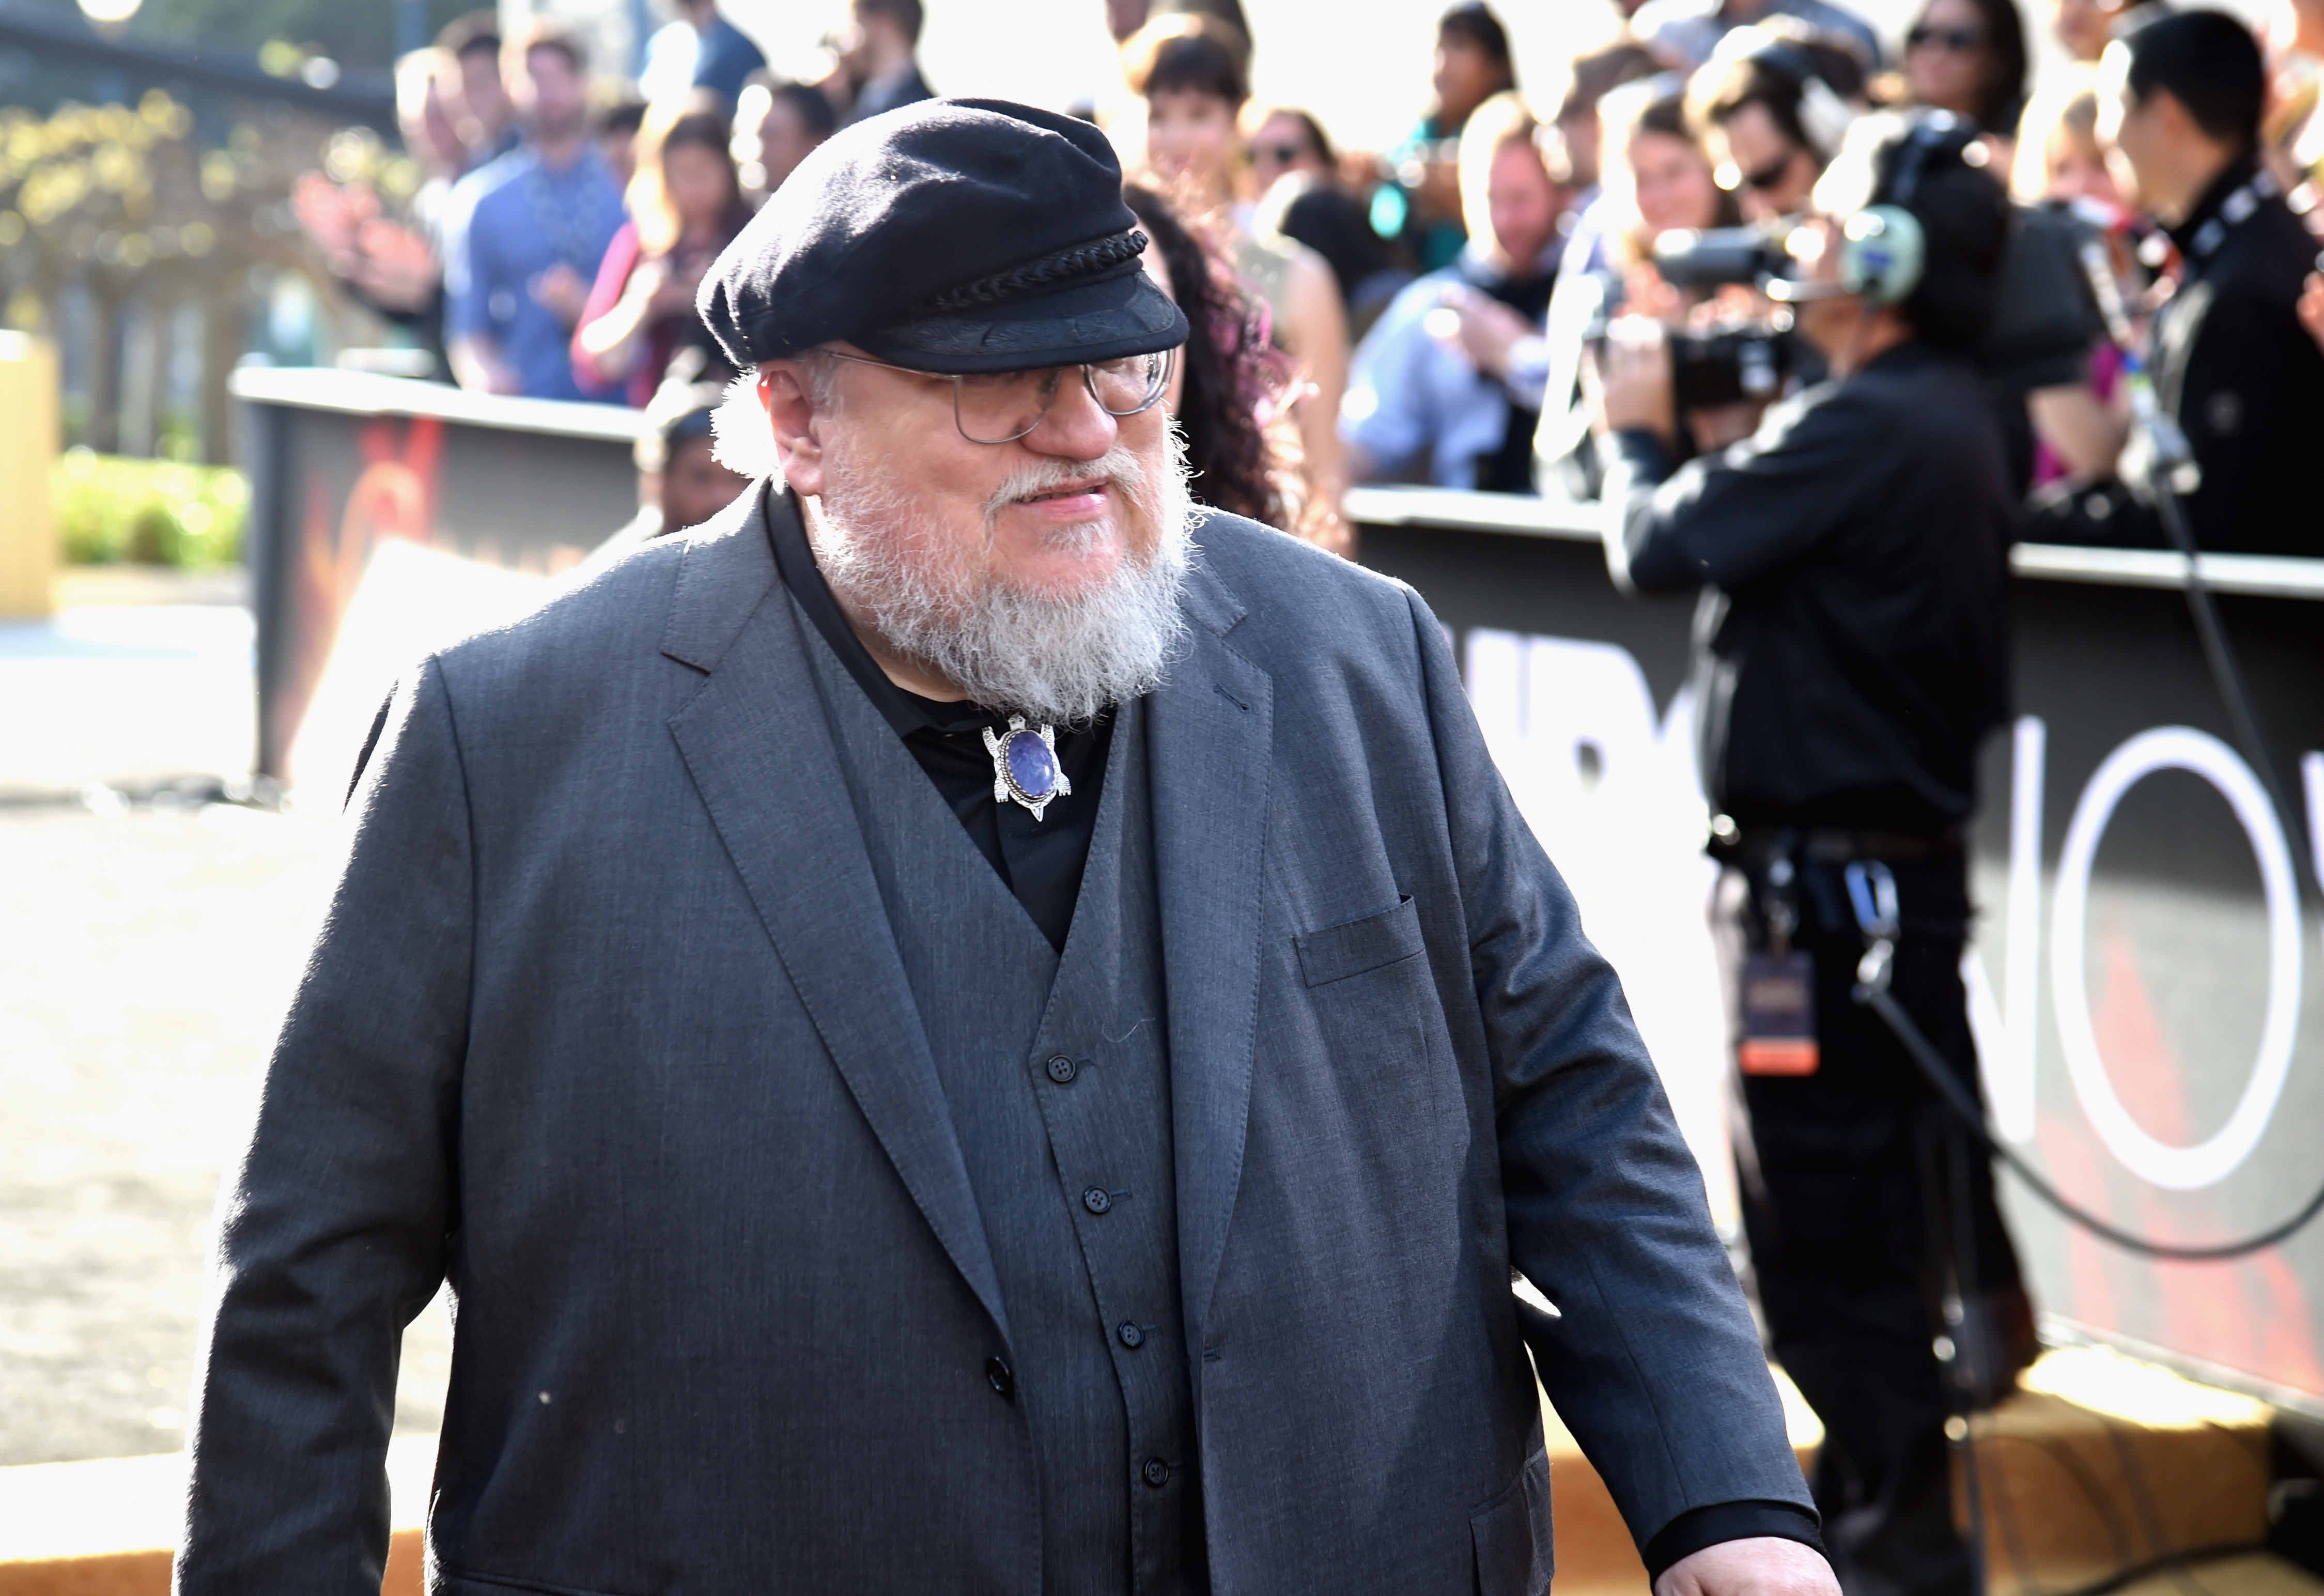 George R.R. Martin attends the "Game of Thrones" Season 5 Premiere at the San Francisco Opera House on March 23, 2015. (Jeff Kravitz—HBO/Getty Images)